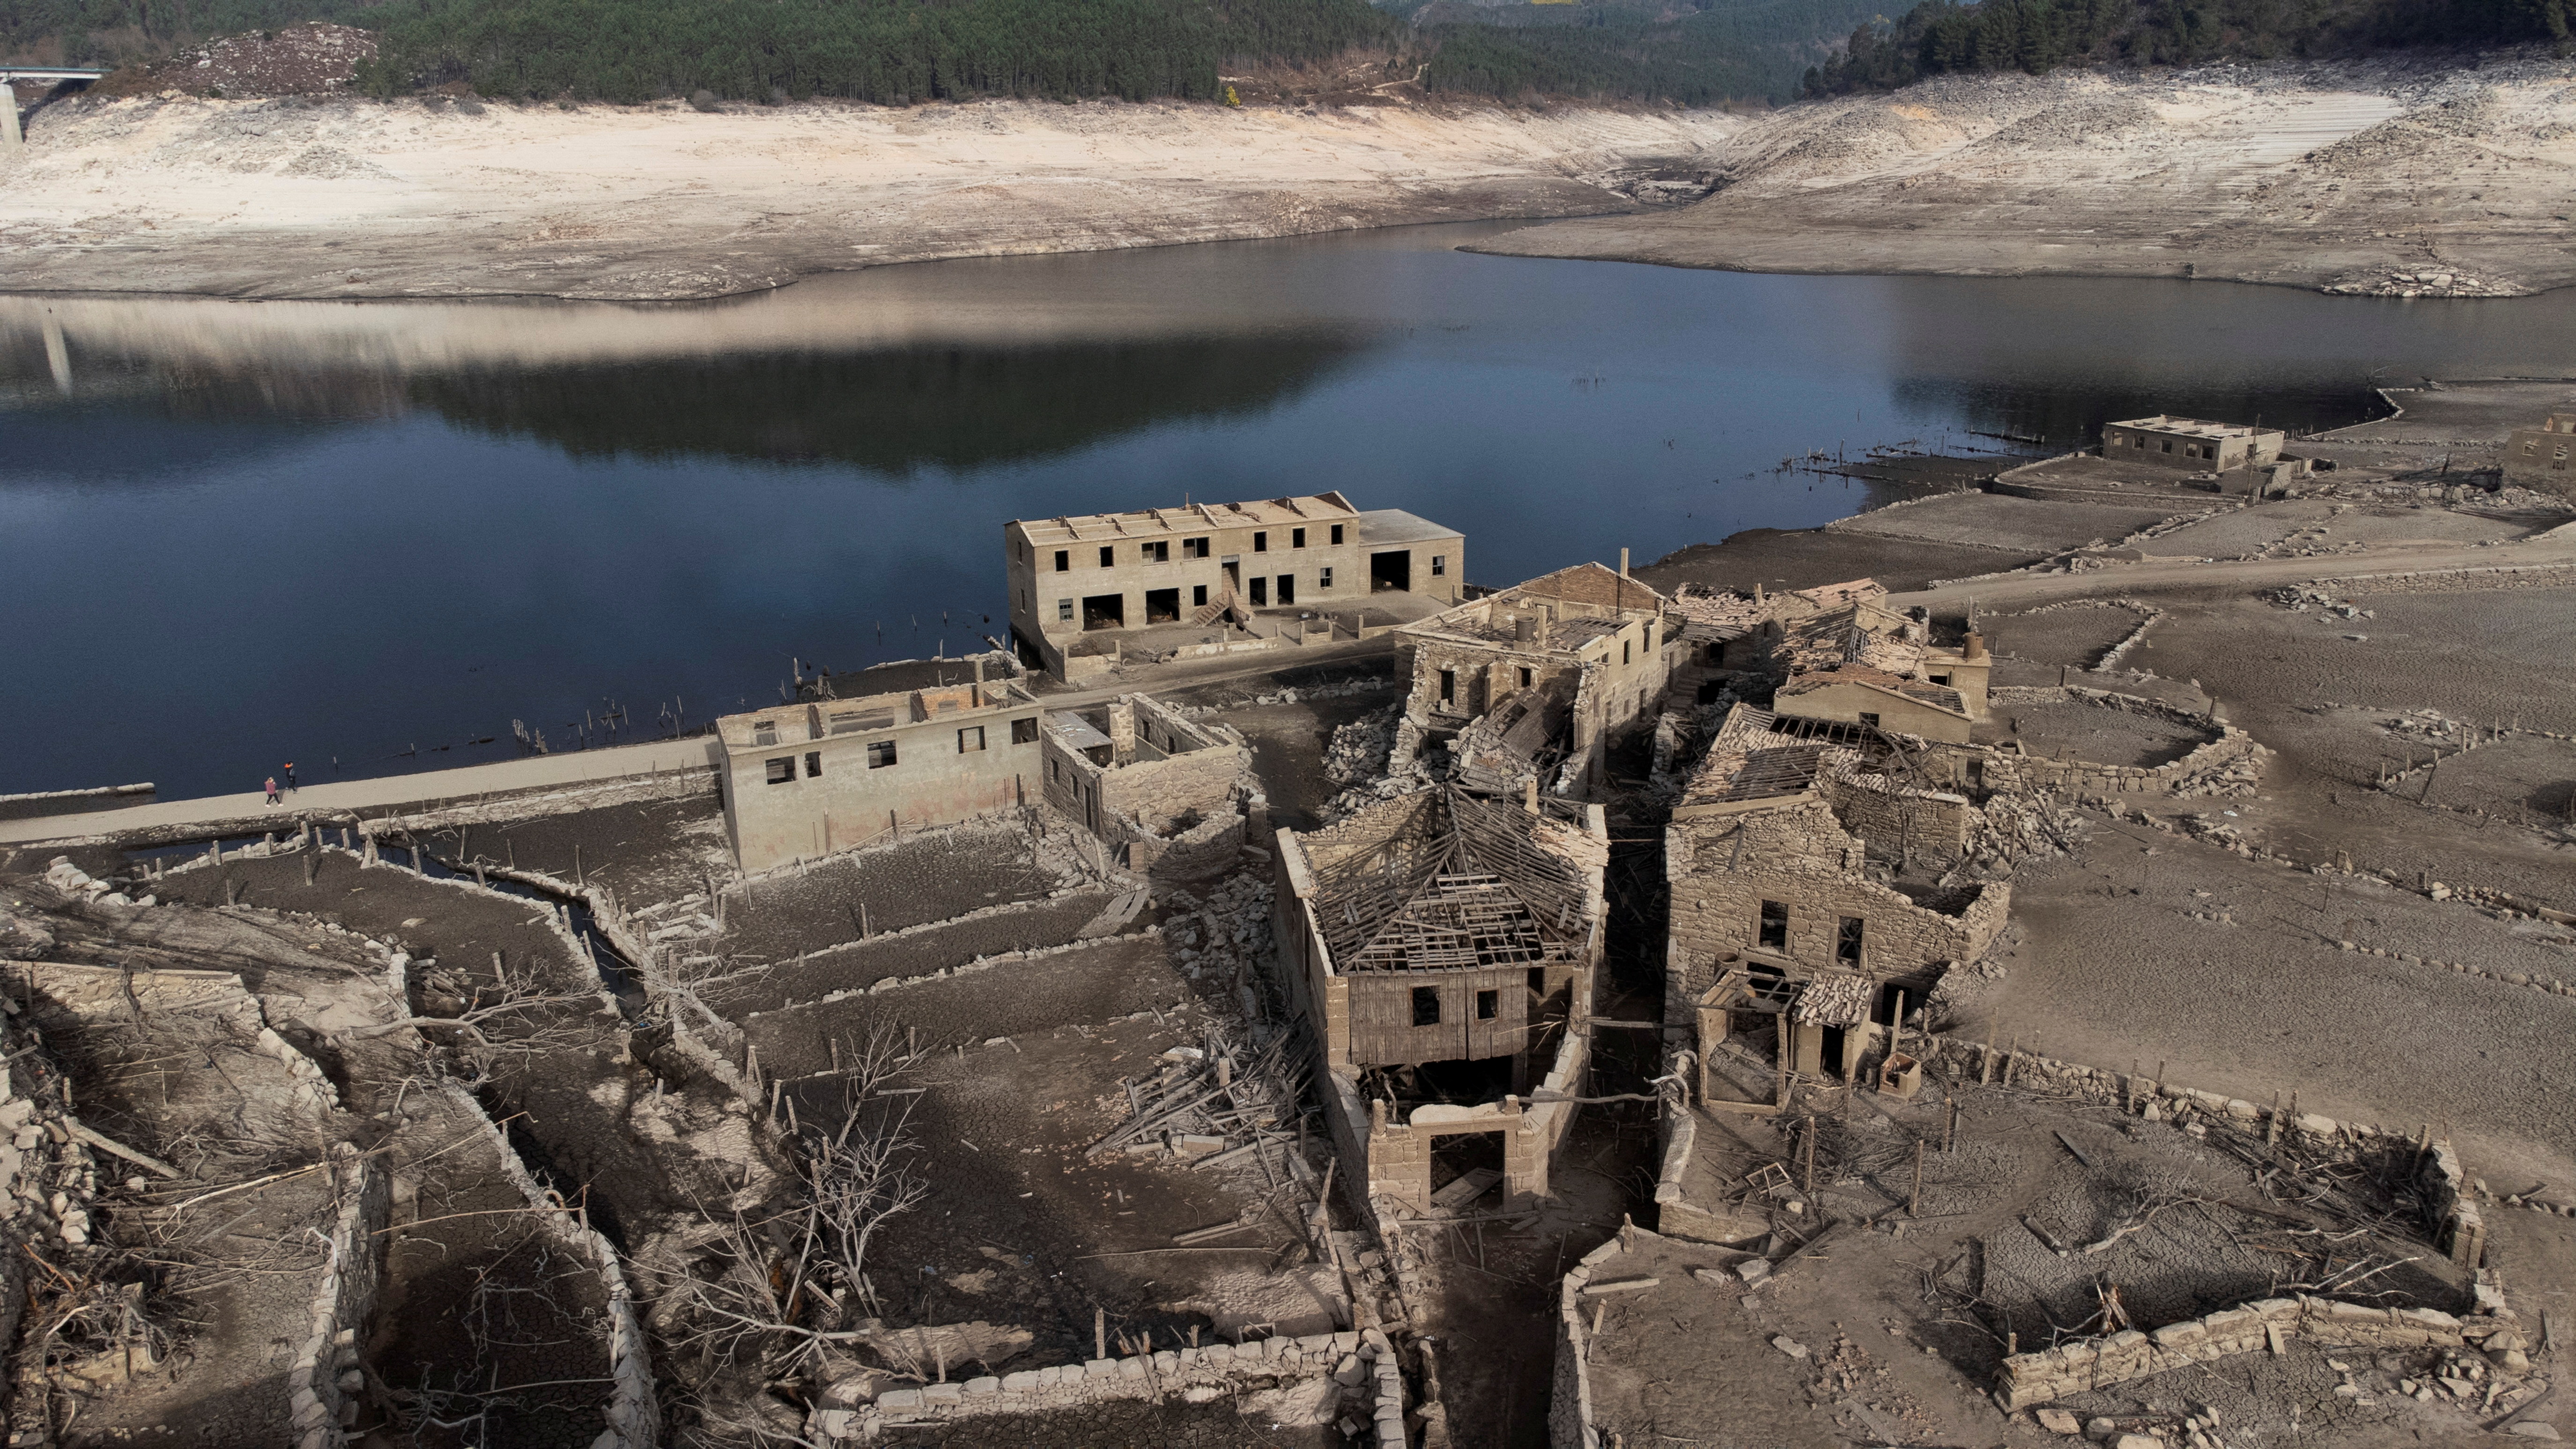 Old Spanish town re-emerges as drought dries out reservoir